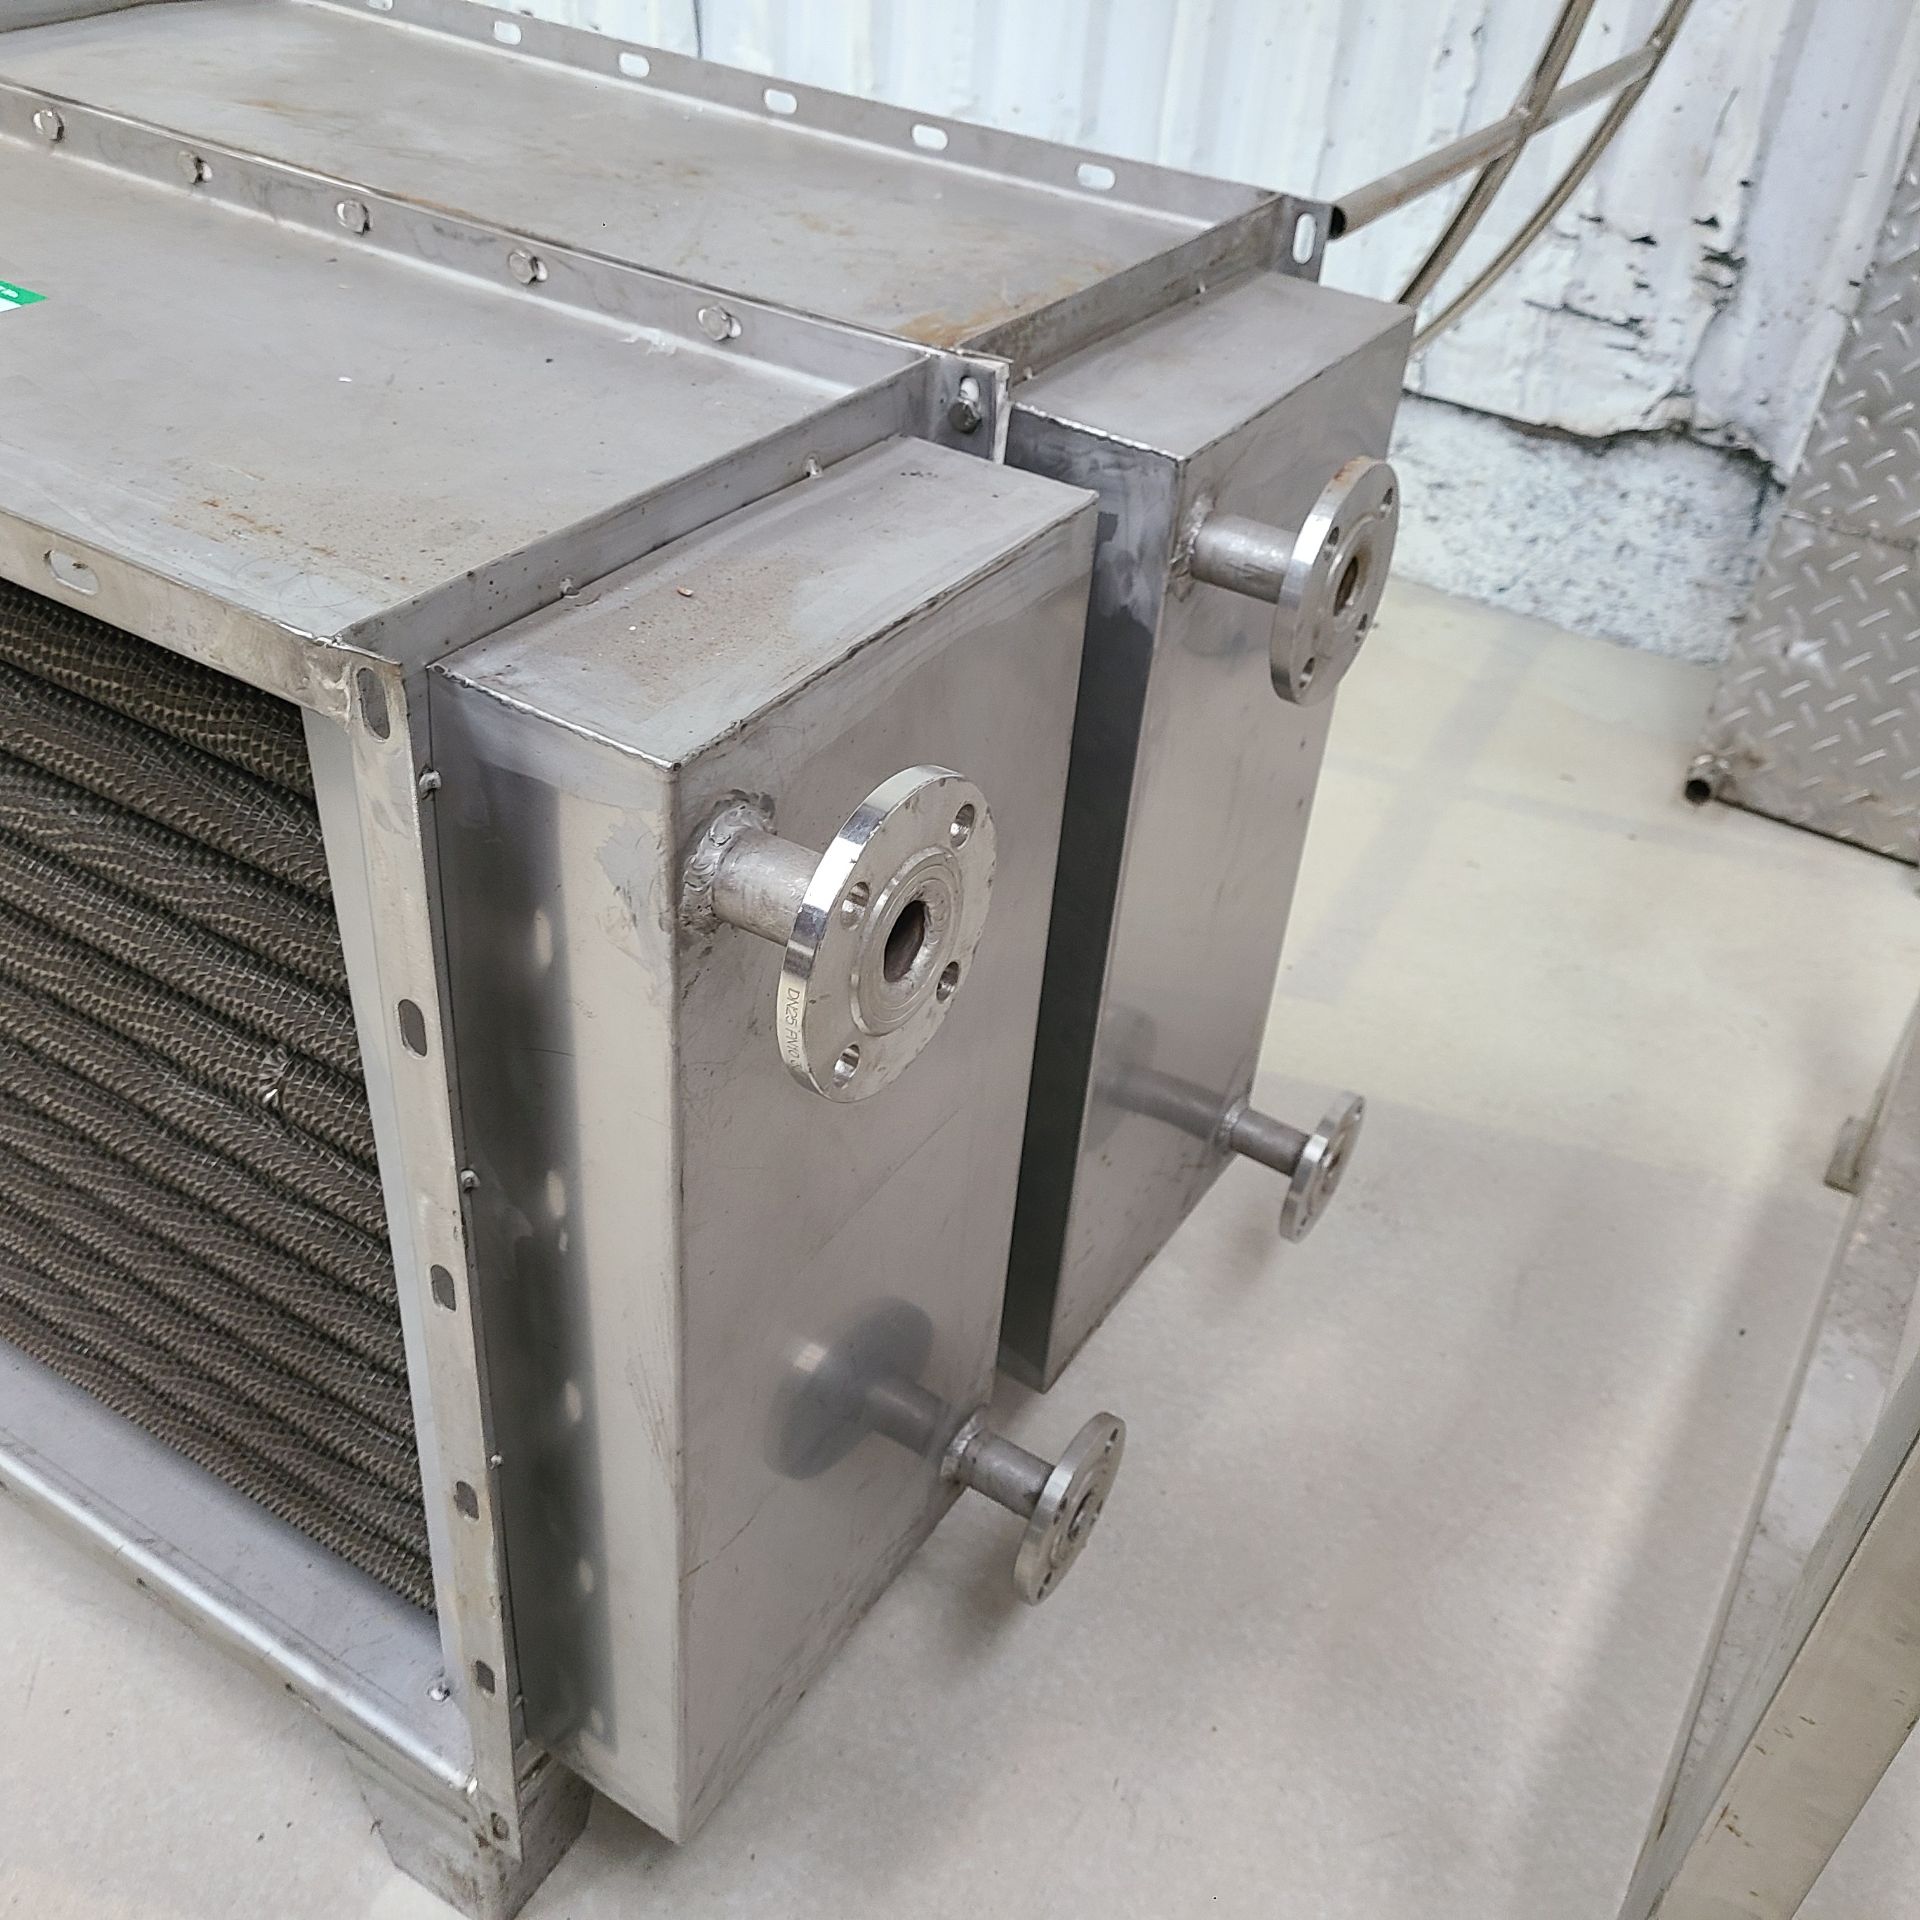 SS CONDENSING UNIT 40 1/2 L x 28 IN. W x 30 IN. H - Image 5 of 5